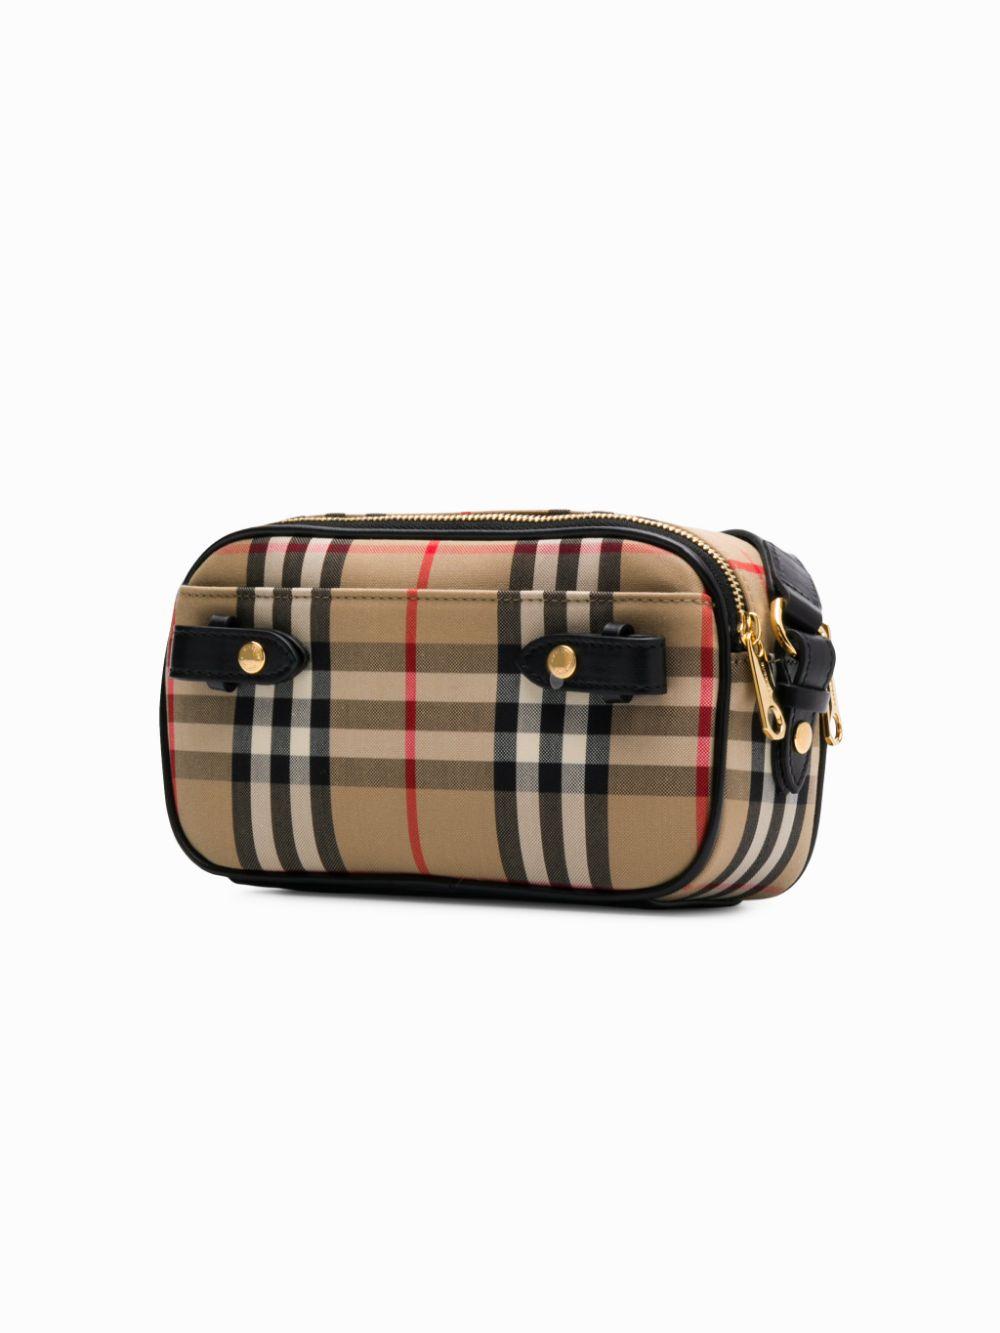 Burberry Leather Micro Vintage Check Camera Bag in Brown | Lyst